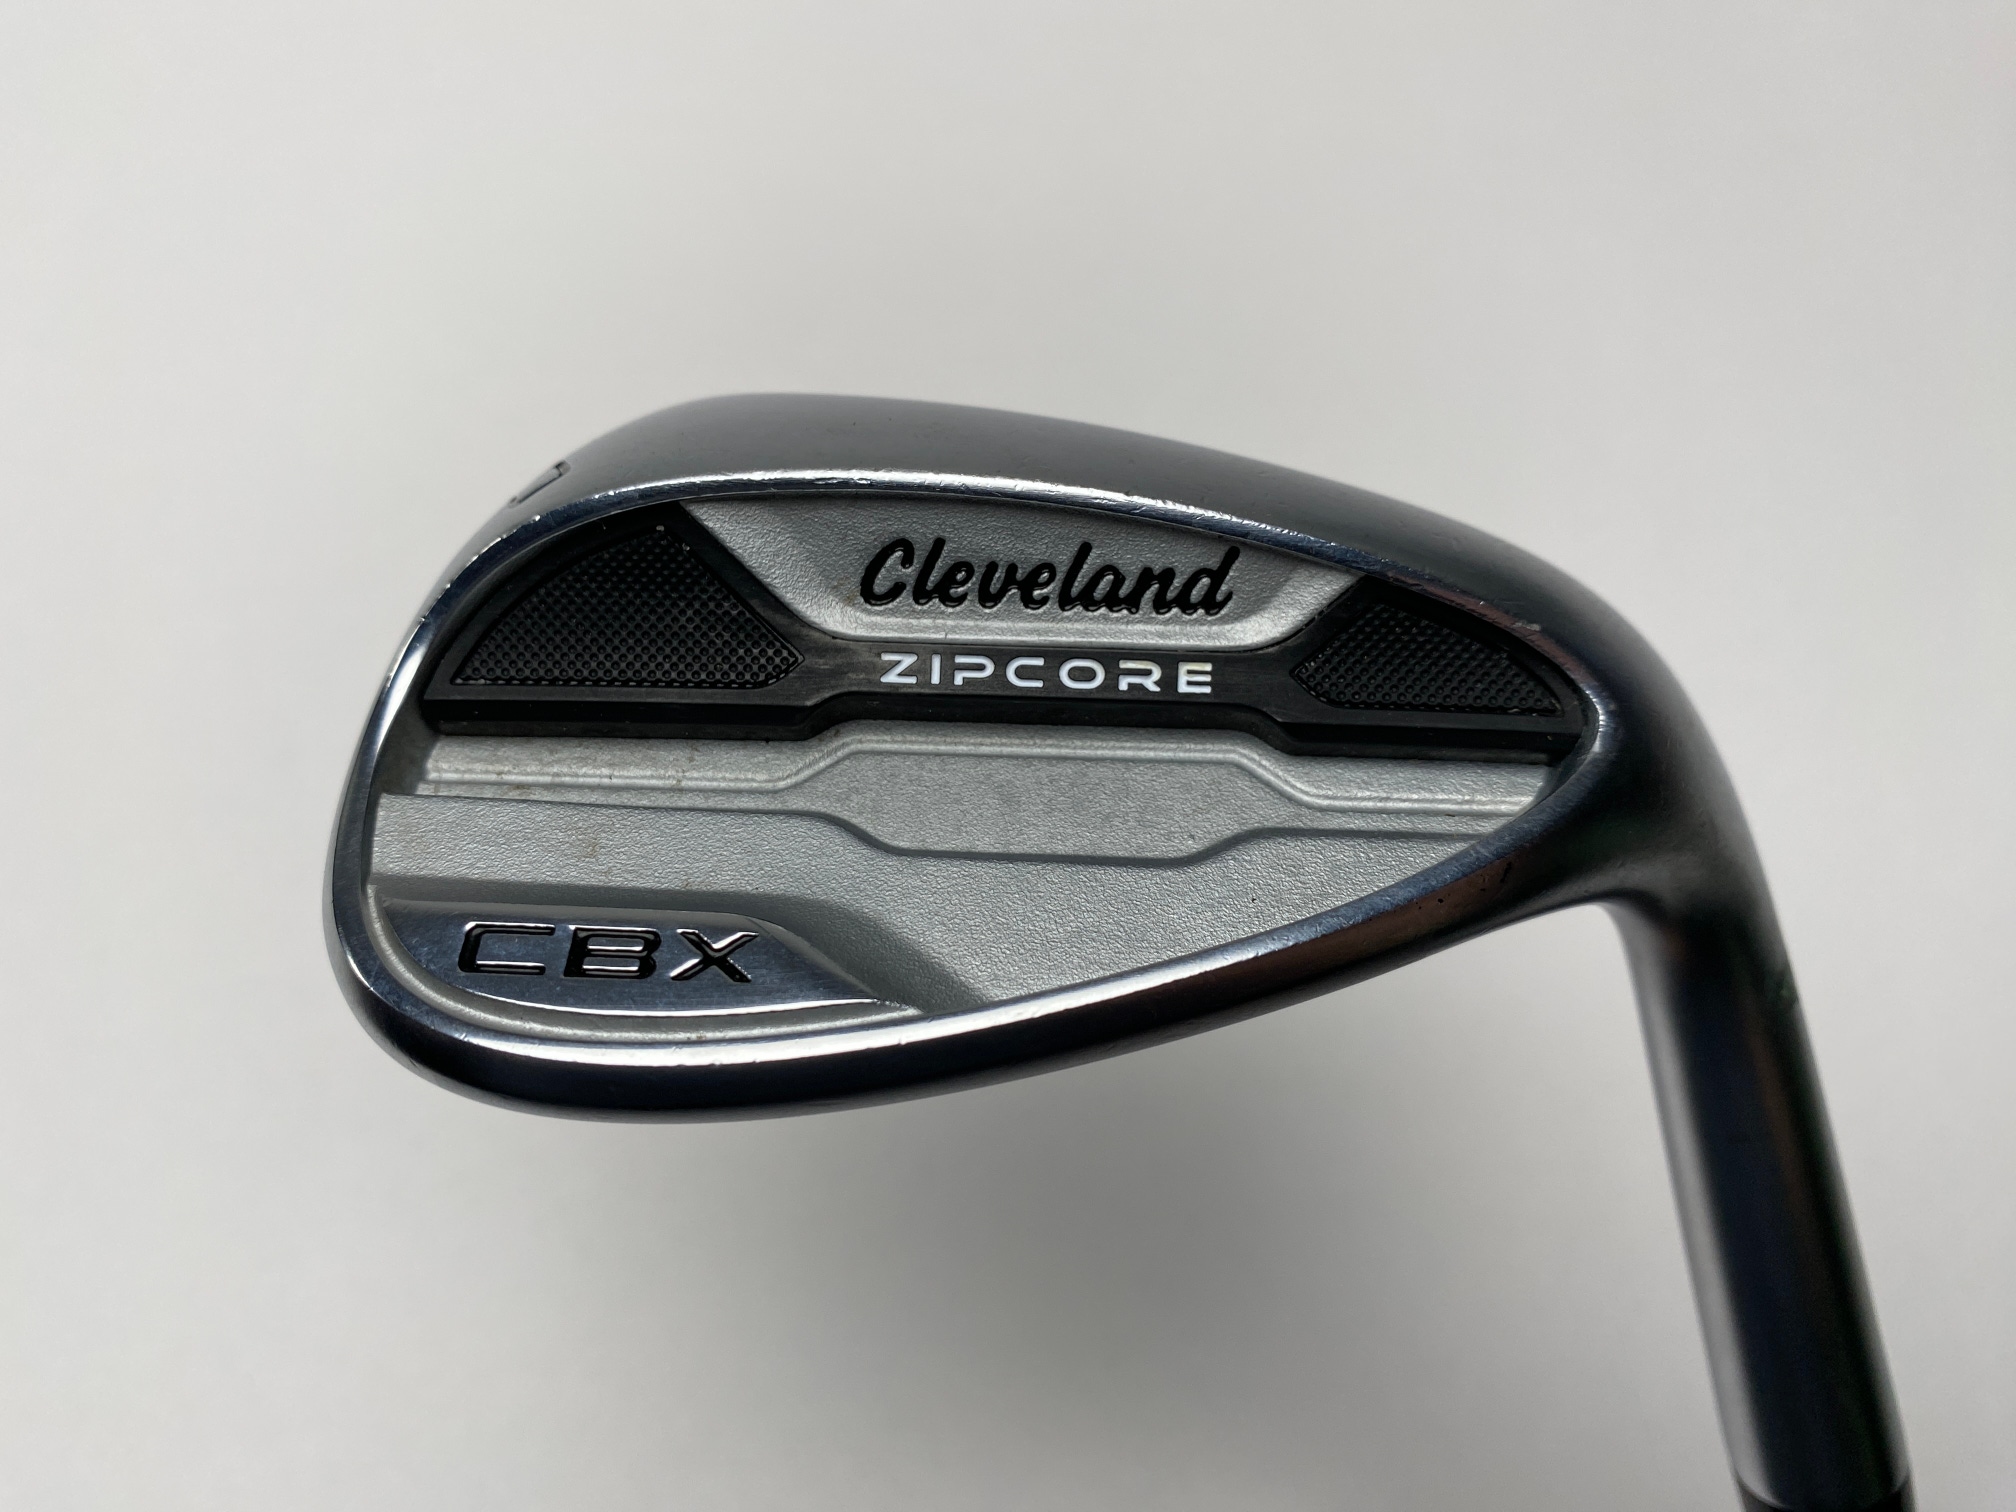 Cleveland CBX Zipcore 60* 10 Project X Catalyst Black Spinner Wedge Graphite RH